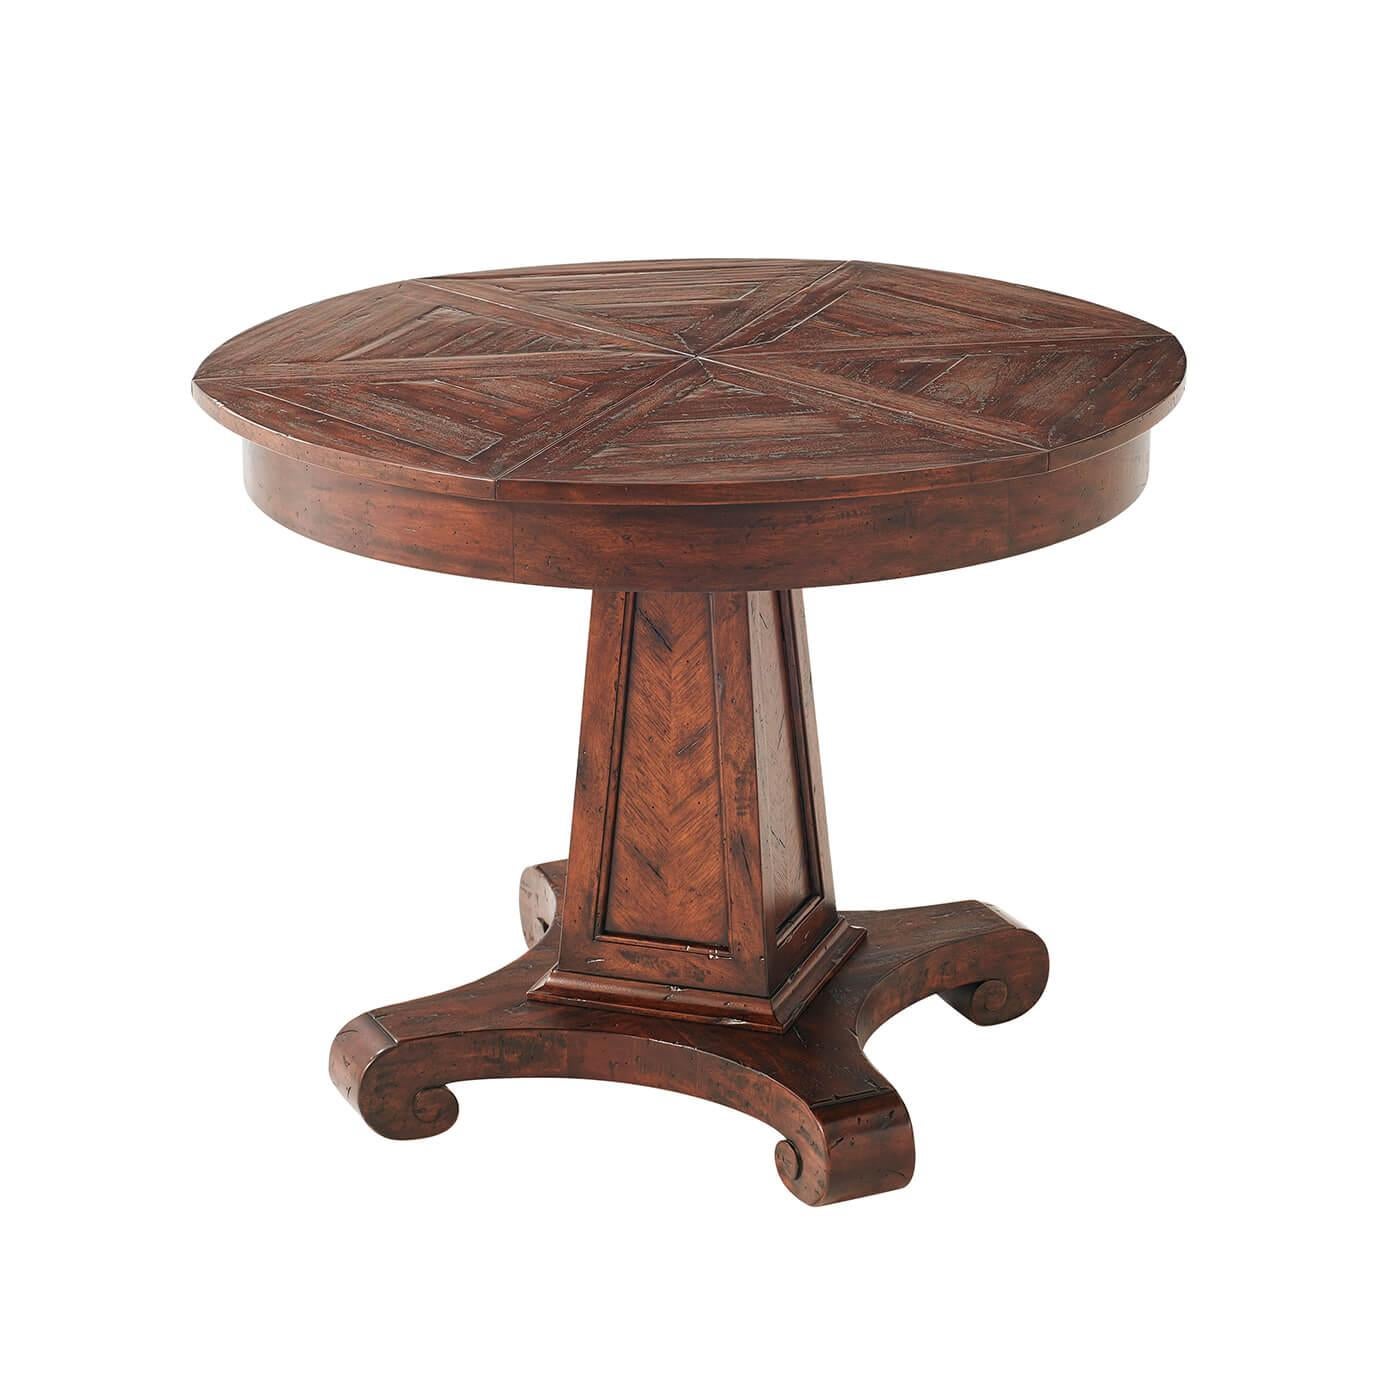 Country Antiqued Circular Extending Dining Table